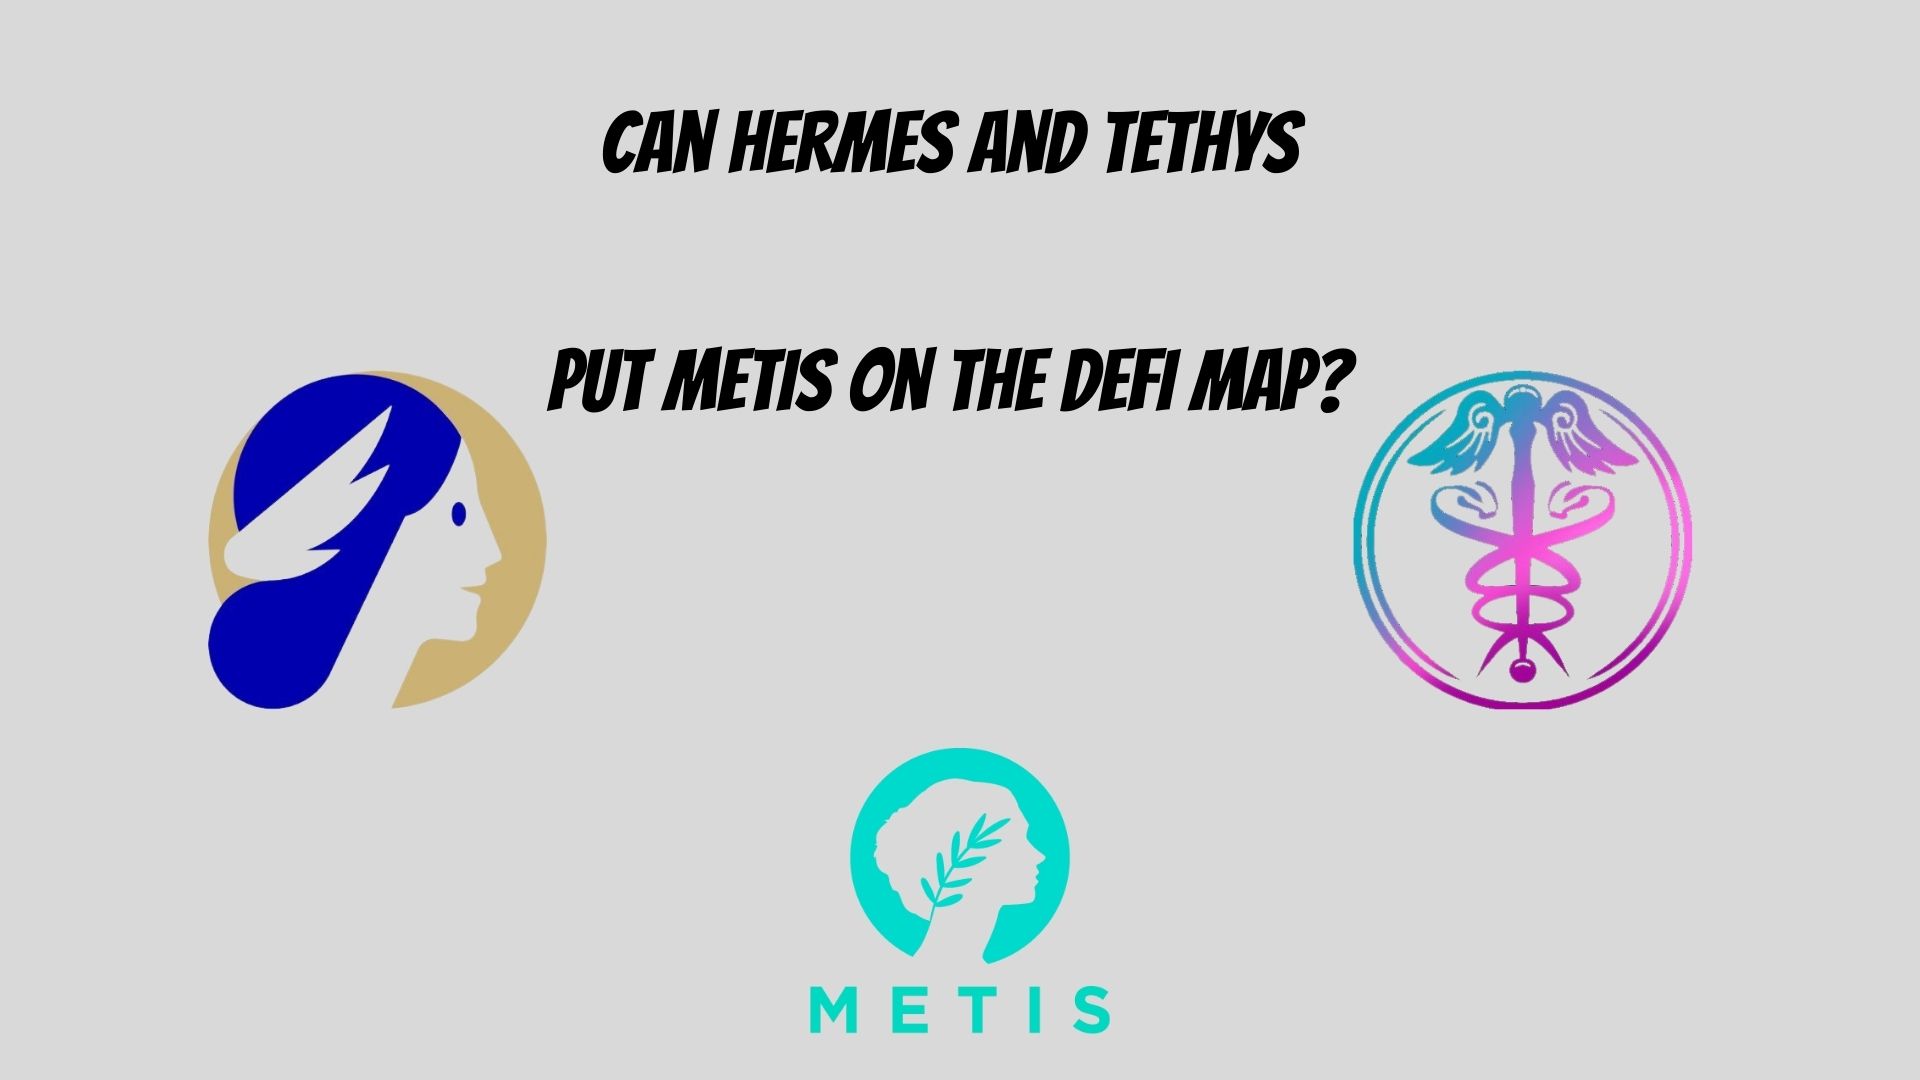 @jerrythefarmer/major-changes-coming-to-metis-with-the-latest-update-from-tethys-and-hermes